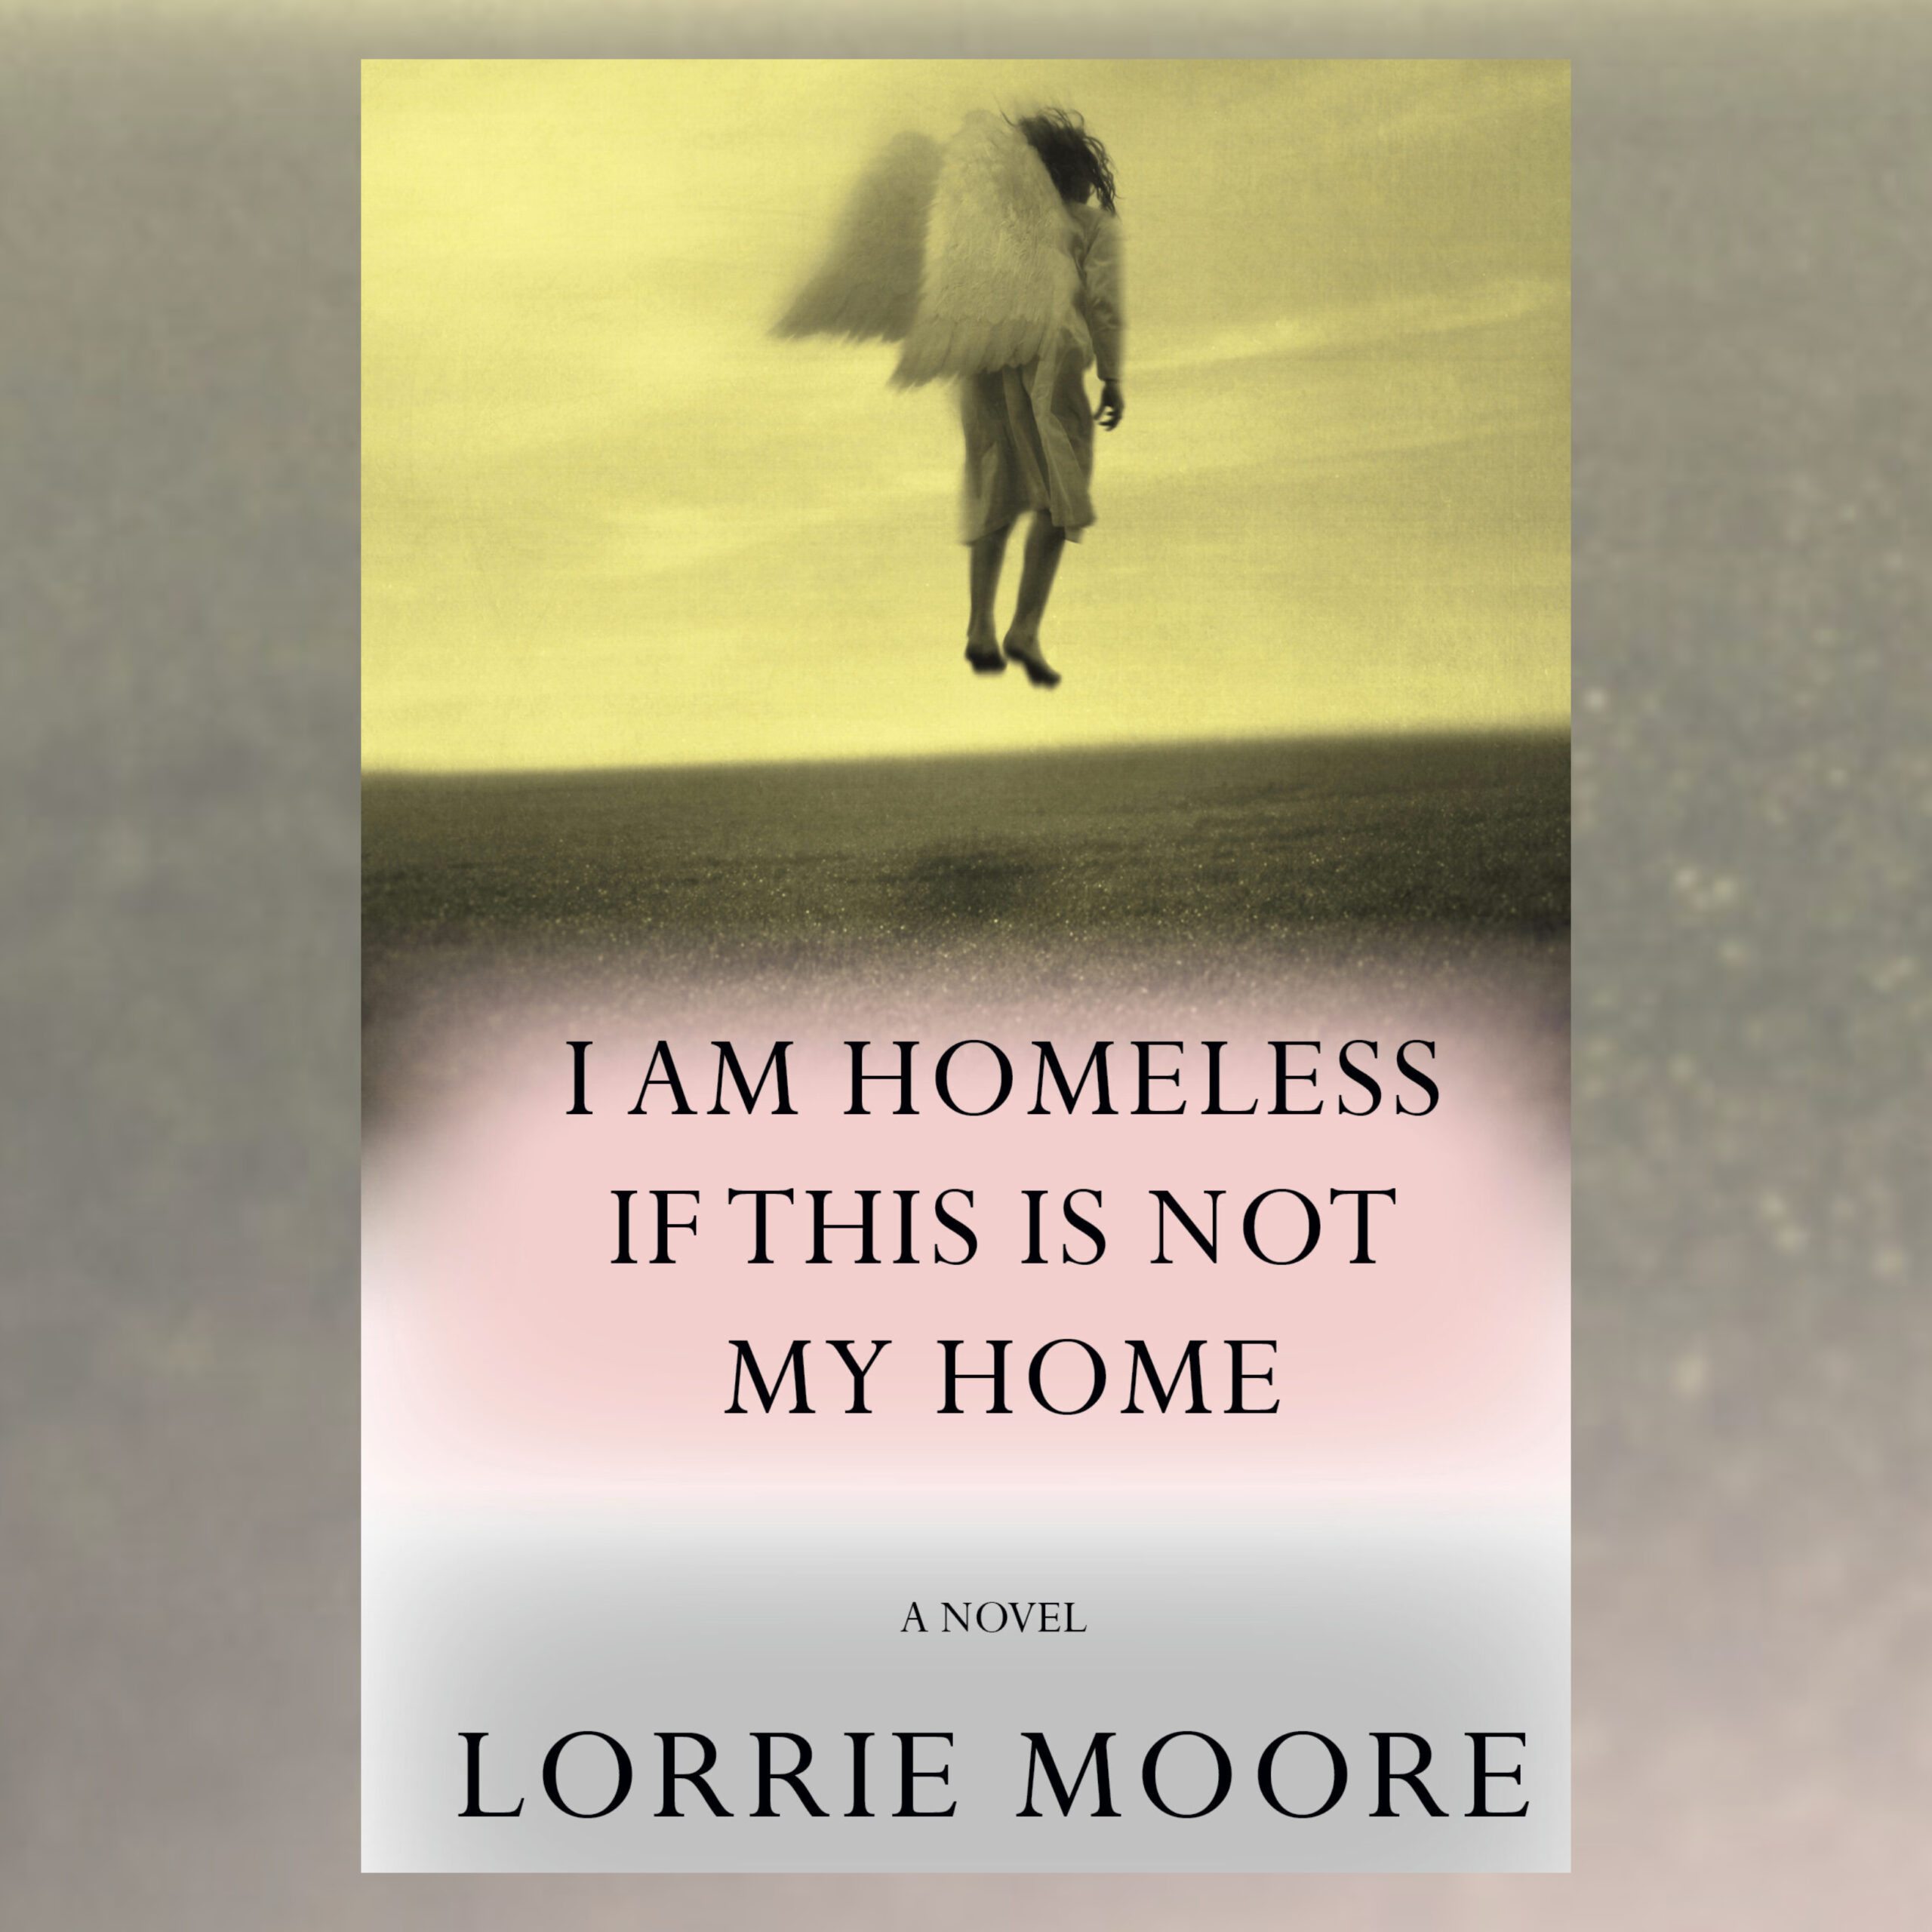 1831 - Lorrie Moore - I Am Homeless If This Is Not My Home | 1831